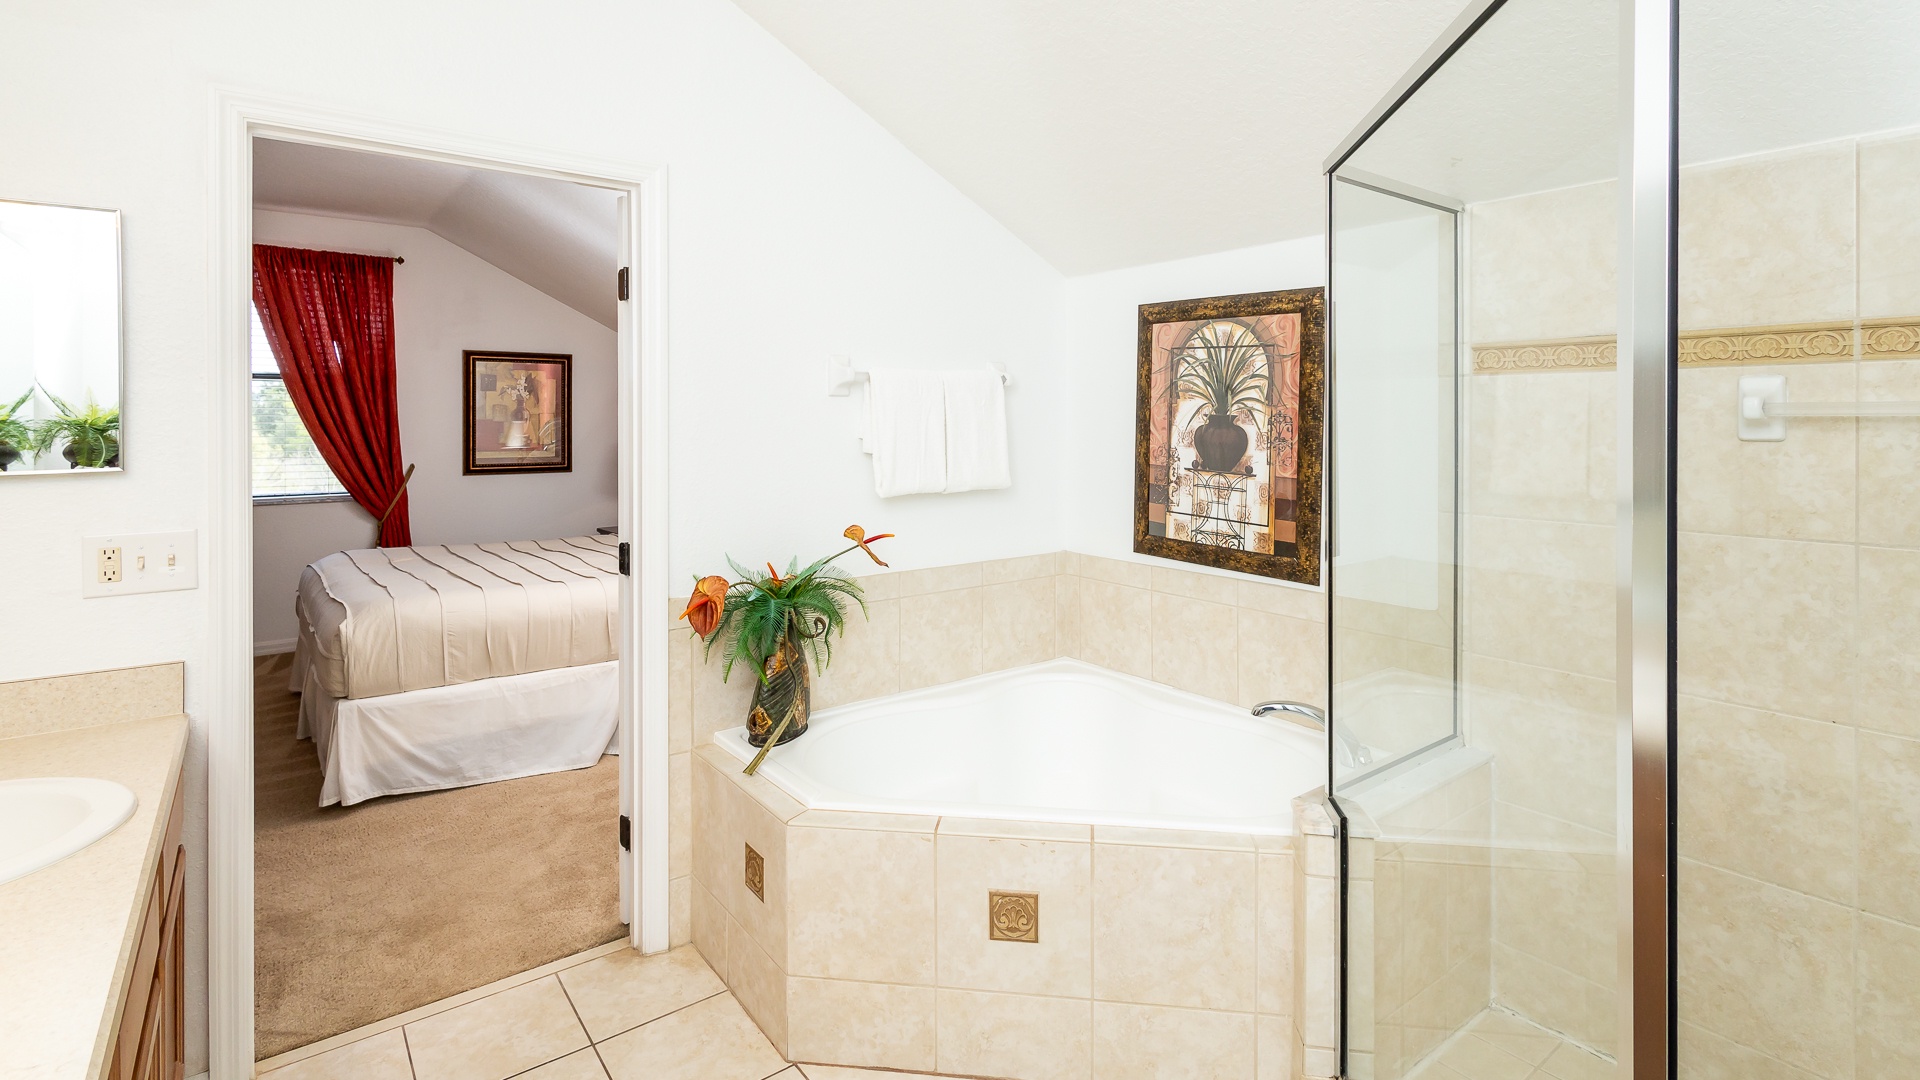 Bedroom 5 ensuite with separate shower, and soaking tub